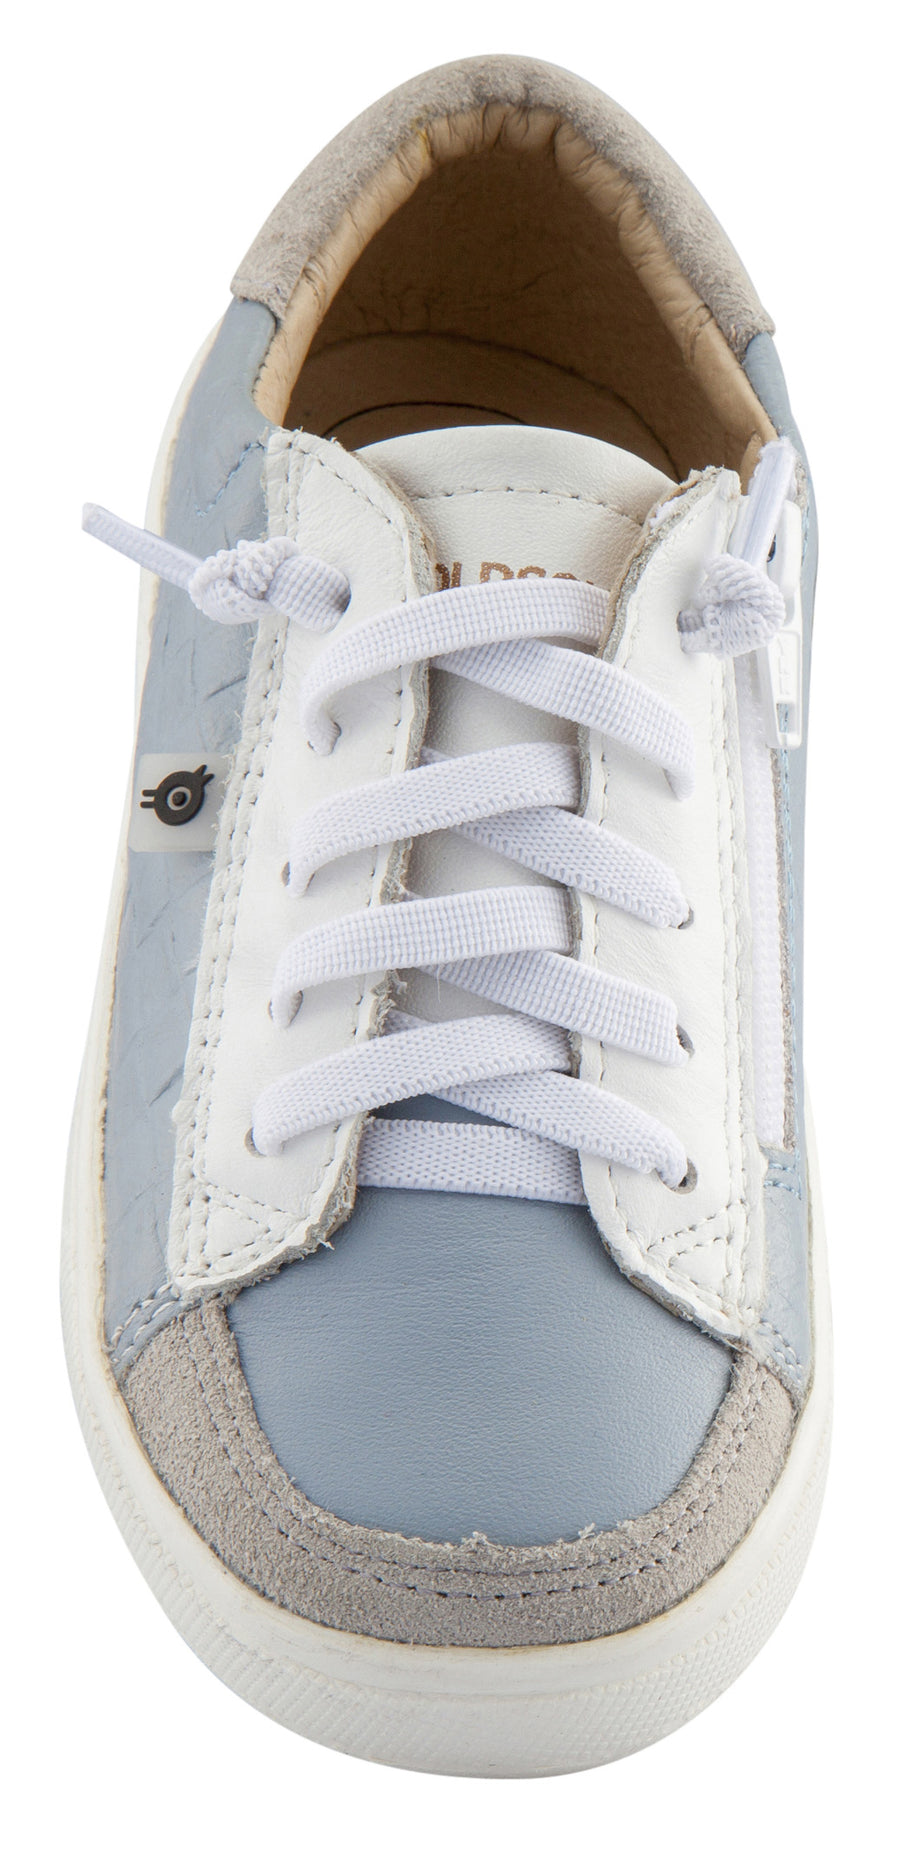 Old Soles Boy's Department Shoe Leather Sneakers, Dusty Blue